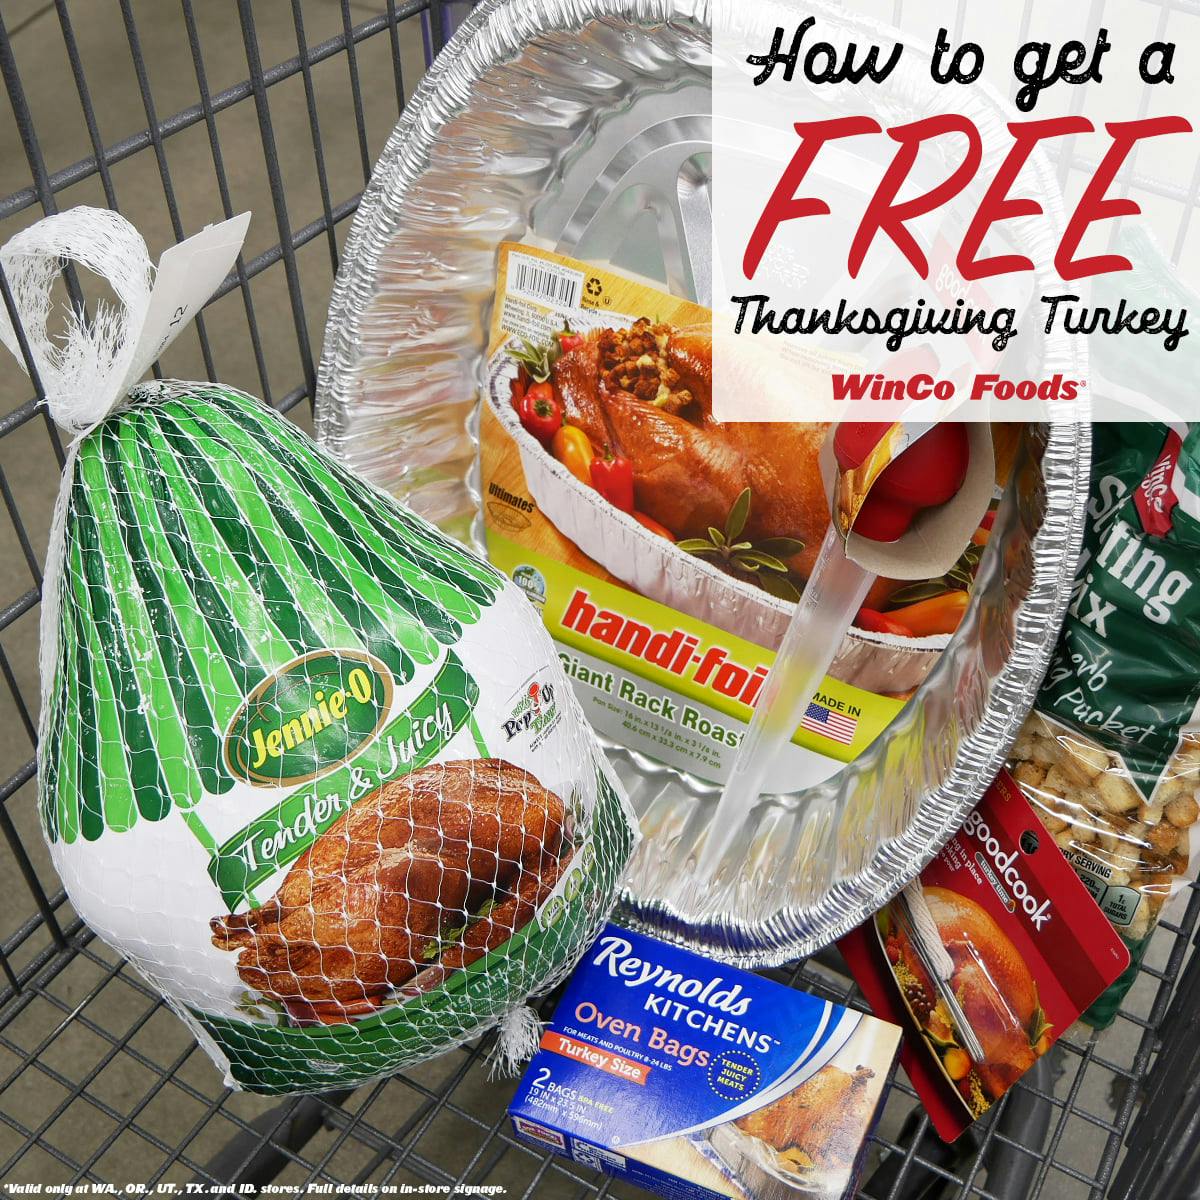 How to Get a Free Thanksgiving Turkey - The Krazy Coupon Lady